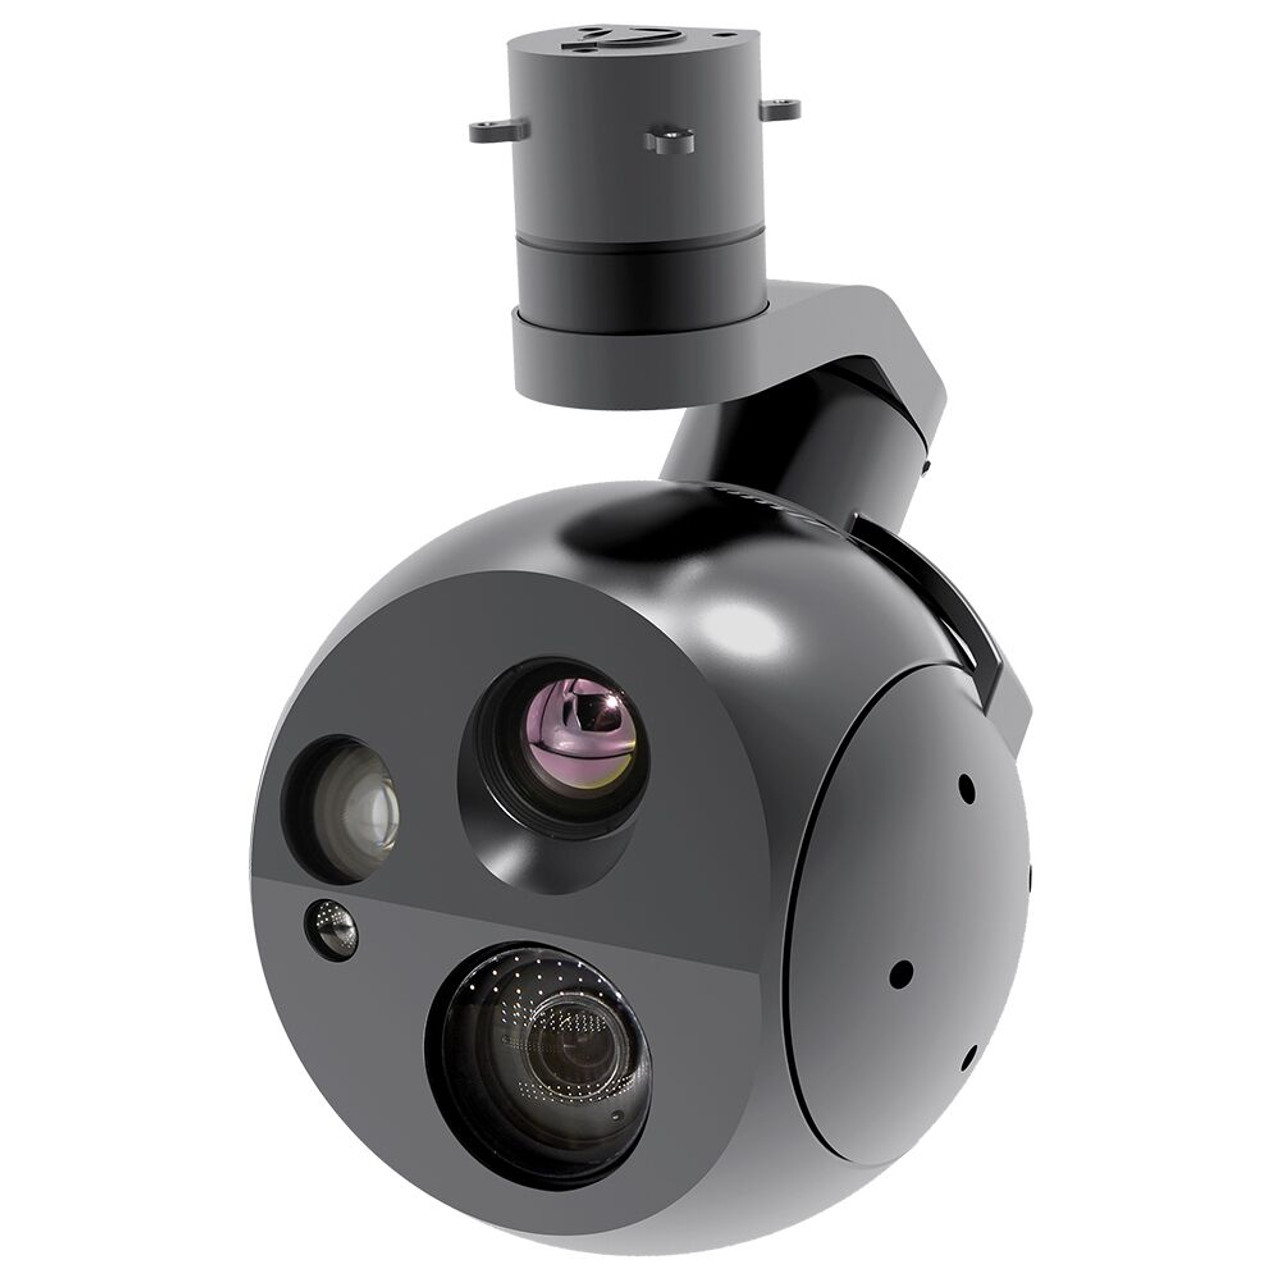 30x Drone Zoom Camera With Thermal Imager, Object Tracking And GPS